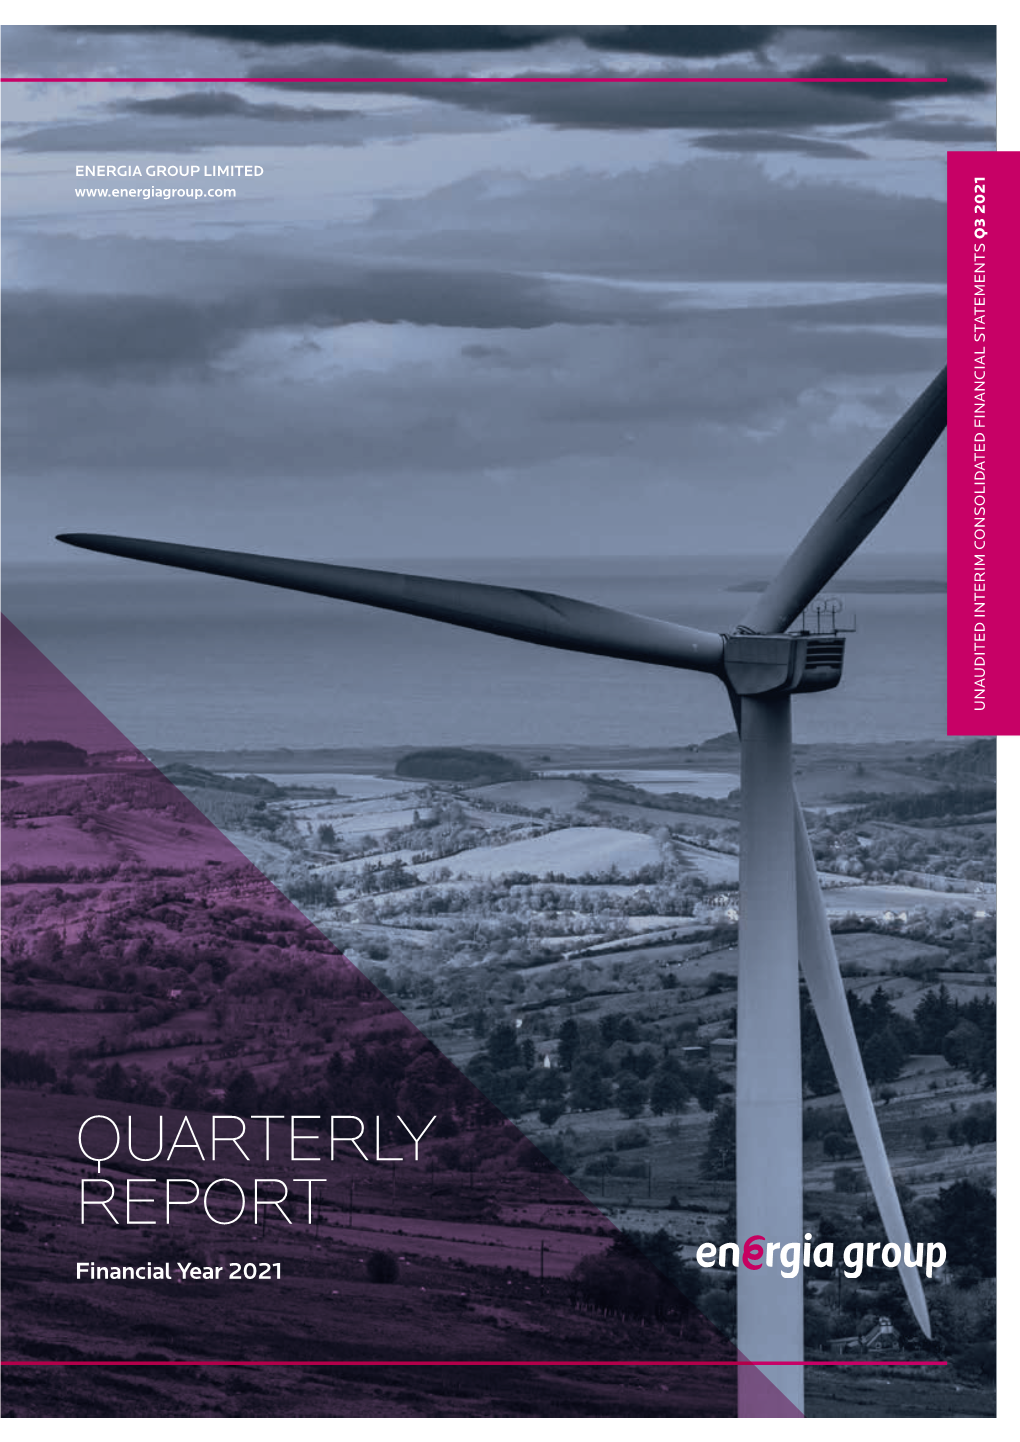 QUARTERLY REPORT Financial Year 2021 Energia Group Limited Unaudited Interim Consolidated Financial Statements Q3 2021